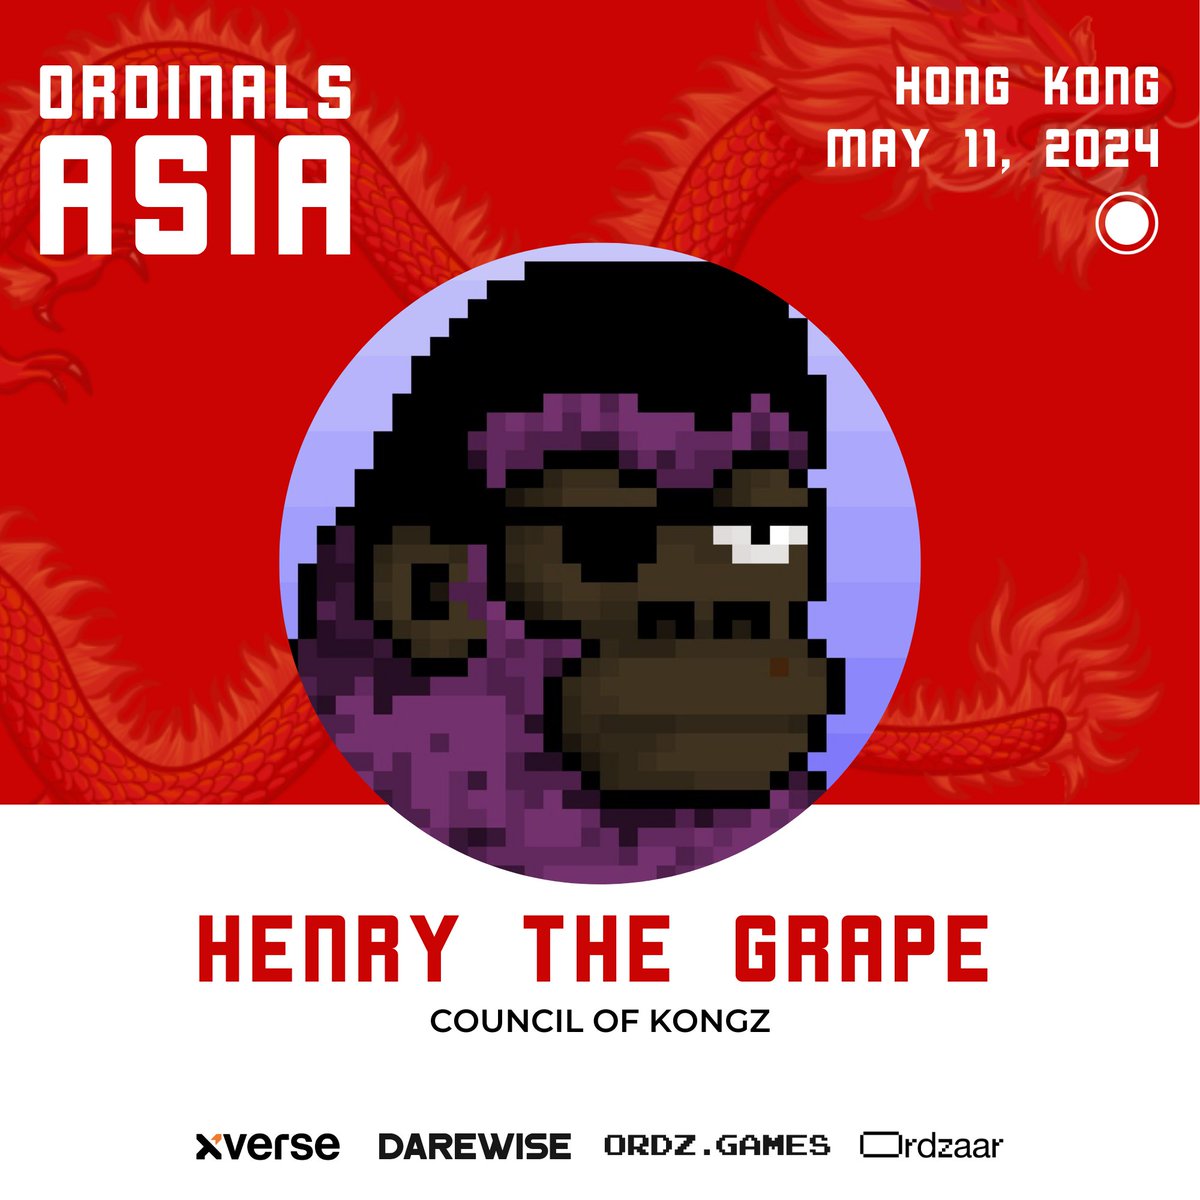 🐲SPEAKER ANNOUNCEMENT🐲 @HenryTheGrape will be speaking at @Ordinals_Asia in Hong Kong! Henry is the Council of Kongz @CyberKongz, a community-based NFT project, and the etcher of #2 Runes - DECENTRALIZED. ⚡ 🎟️Get your ticket today: lu.ma/OrdinalsAsia